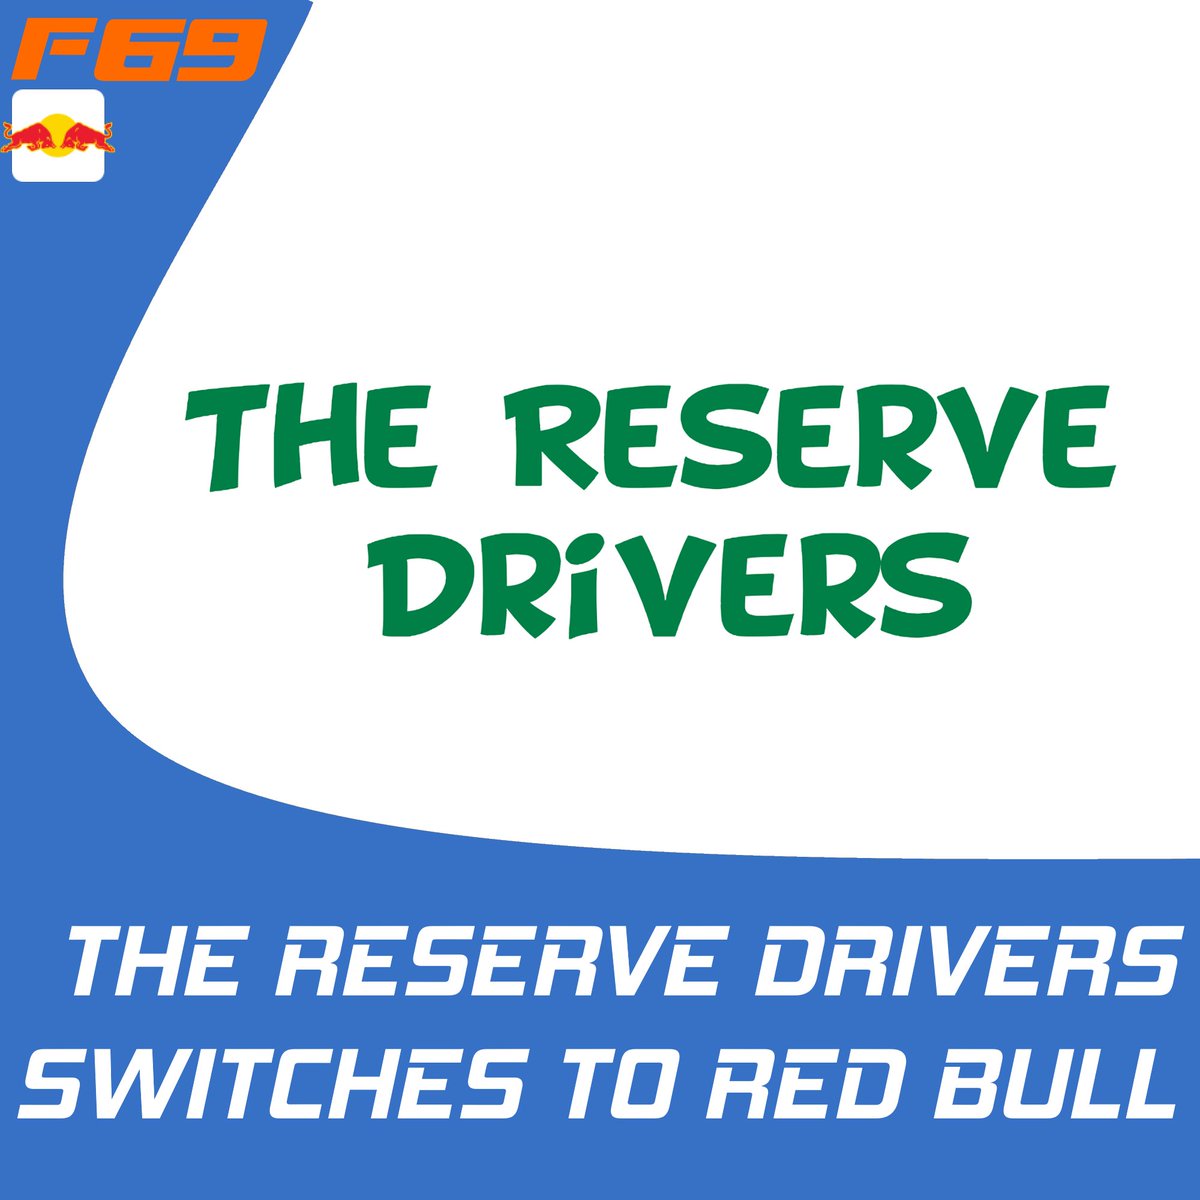 The Reserve Drivers are switching to Red Bull!

The team is leaving Alpine after 2 years of driving the blue / pink car and is going for Red Bull next season.

#Formula69 #F69 #Formula1 #F1 #F12023 #F123 #F123game #Racing #simracing #esports #F1esports #TheReserveDrivers